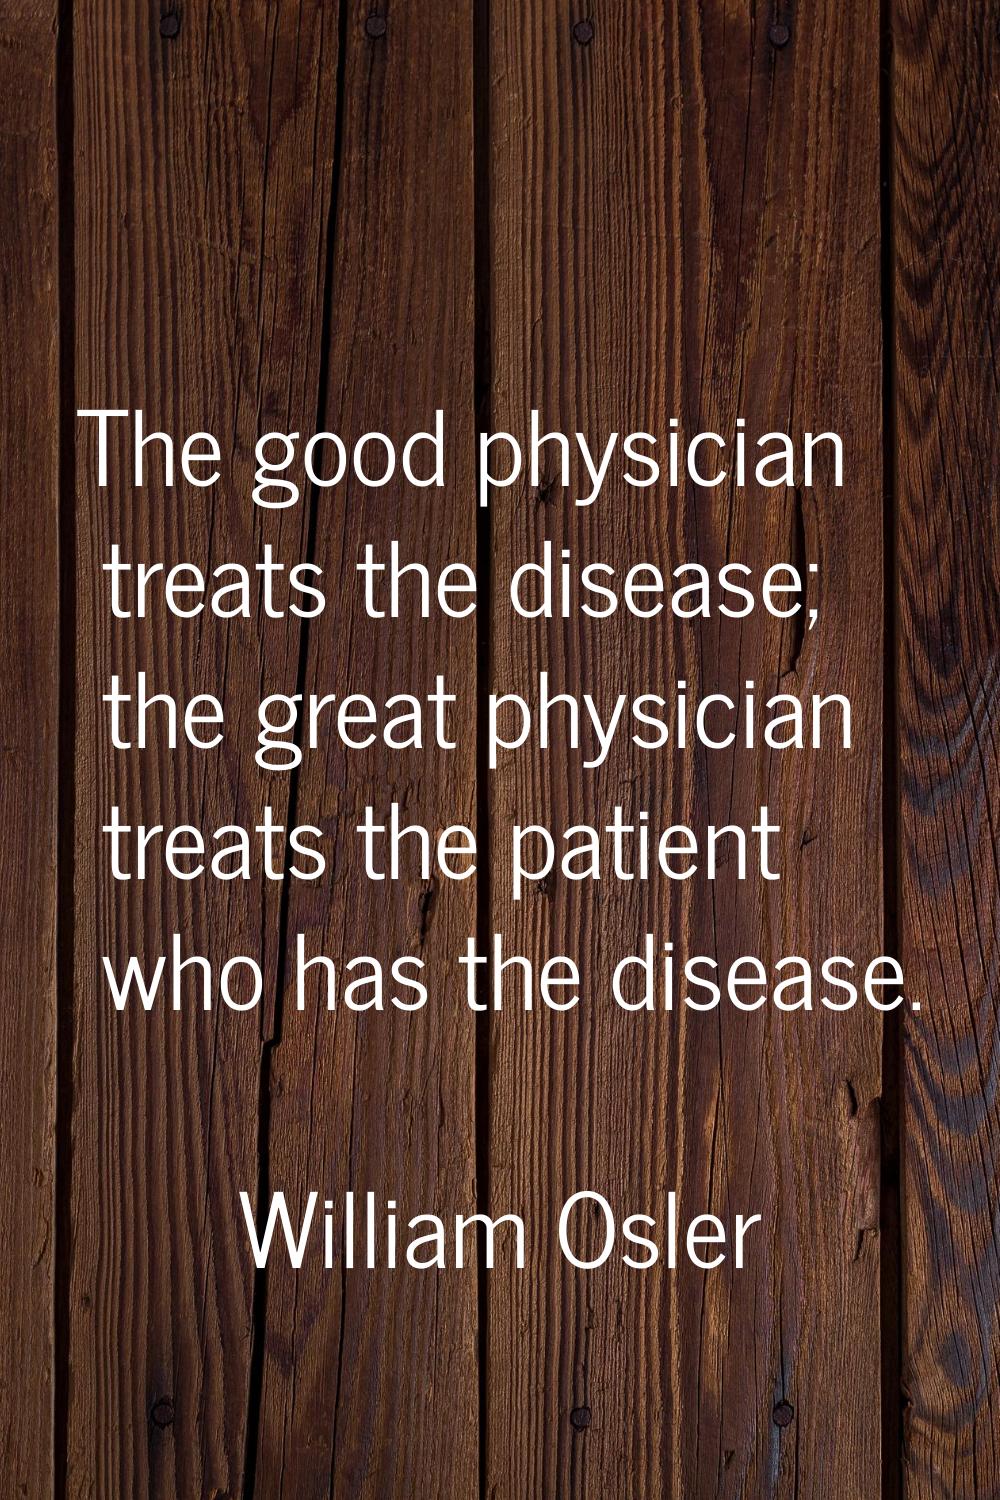 The good physician treats the disease; the great physician treats the patient who has the disease.